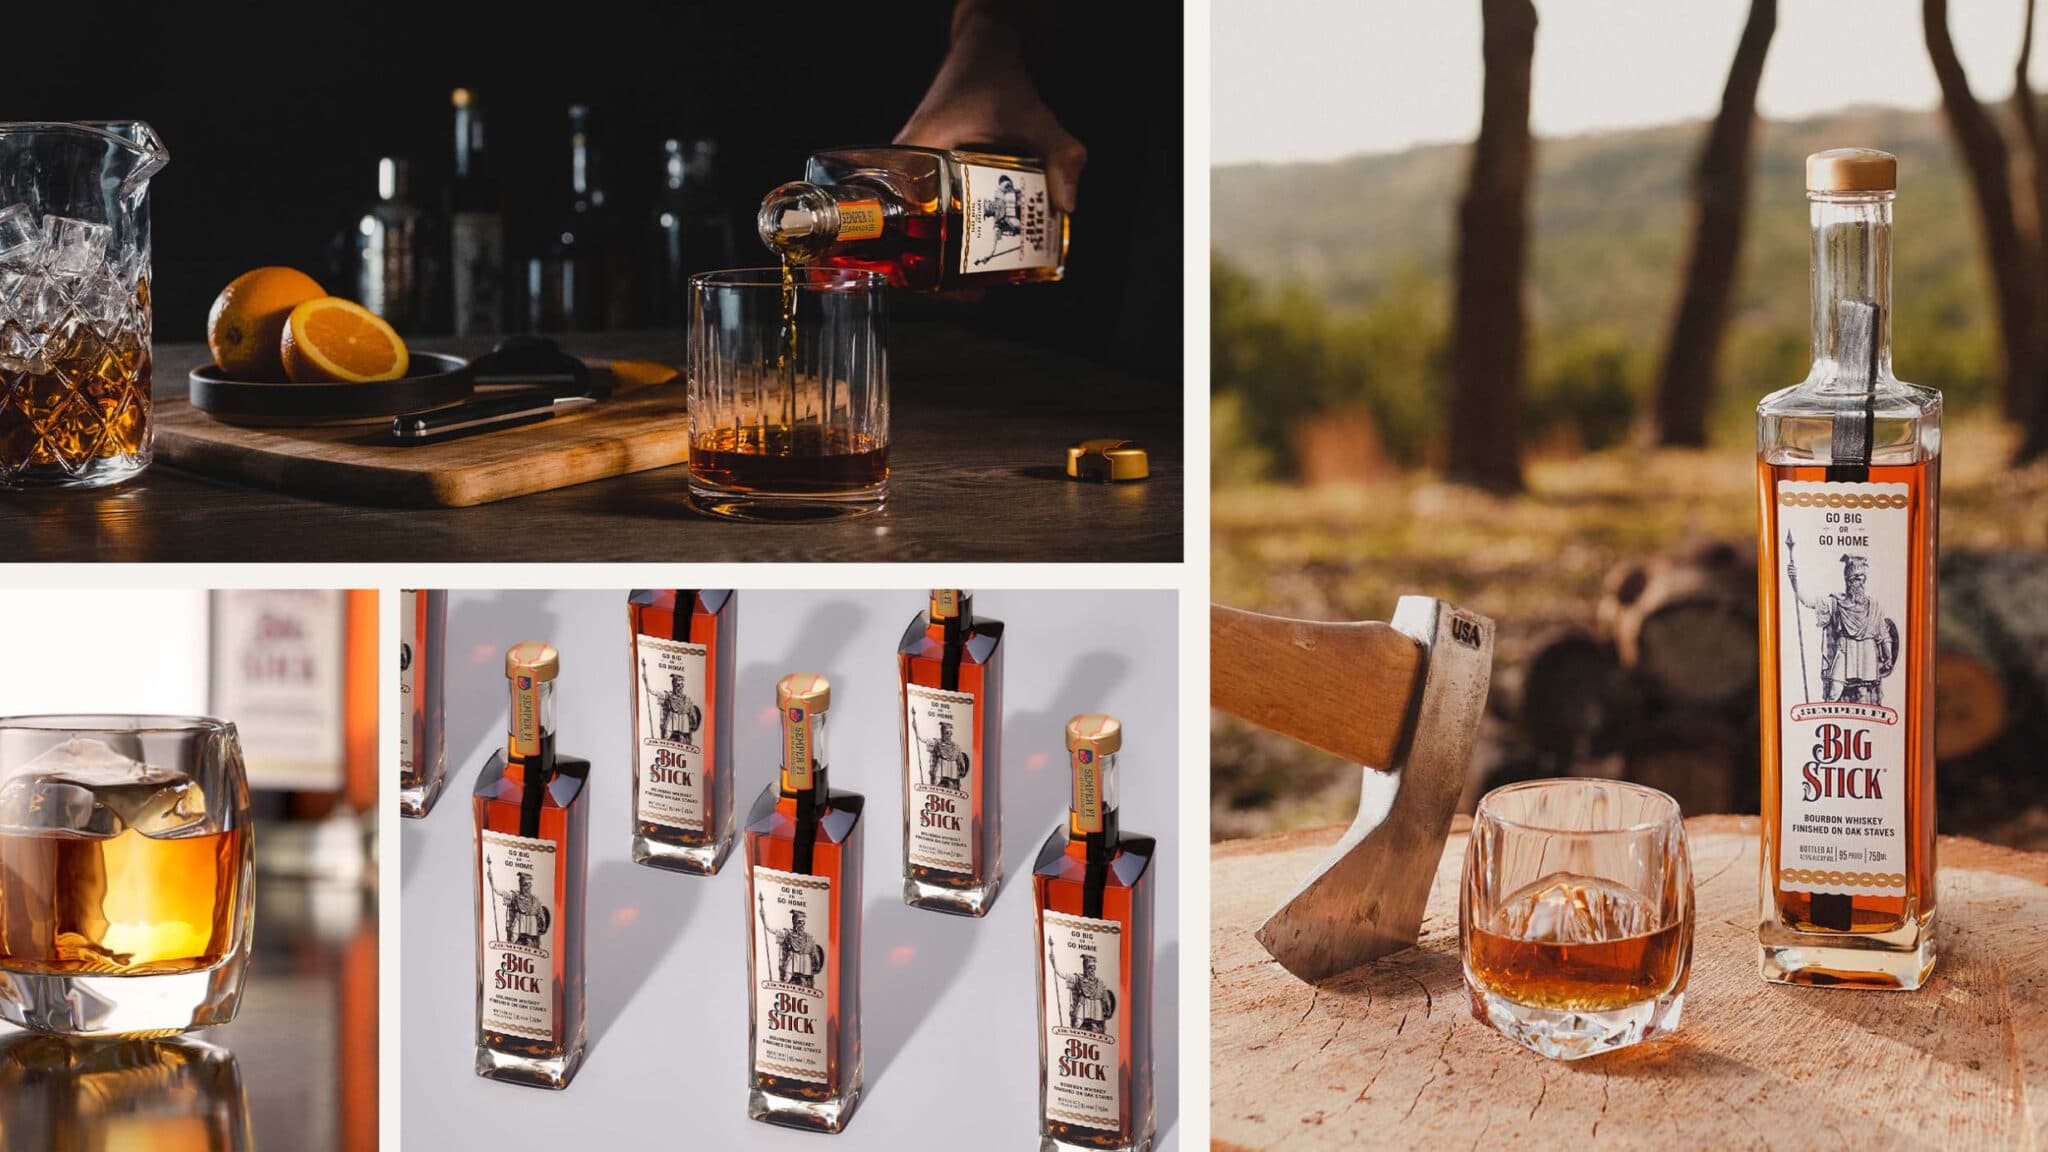 Product photos for various big stick bourbon products